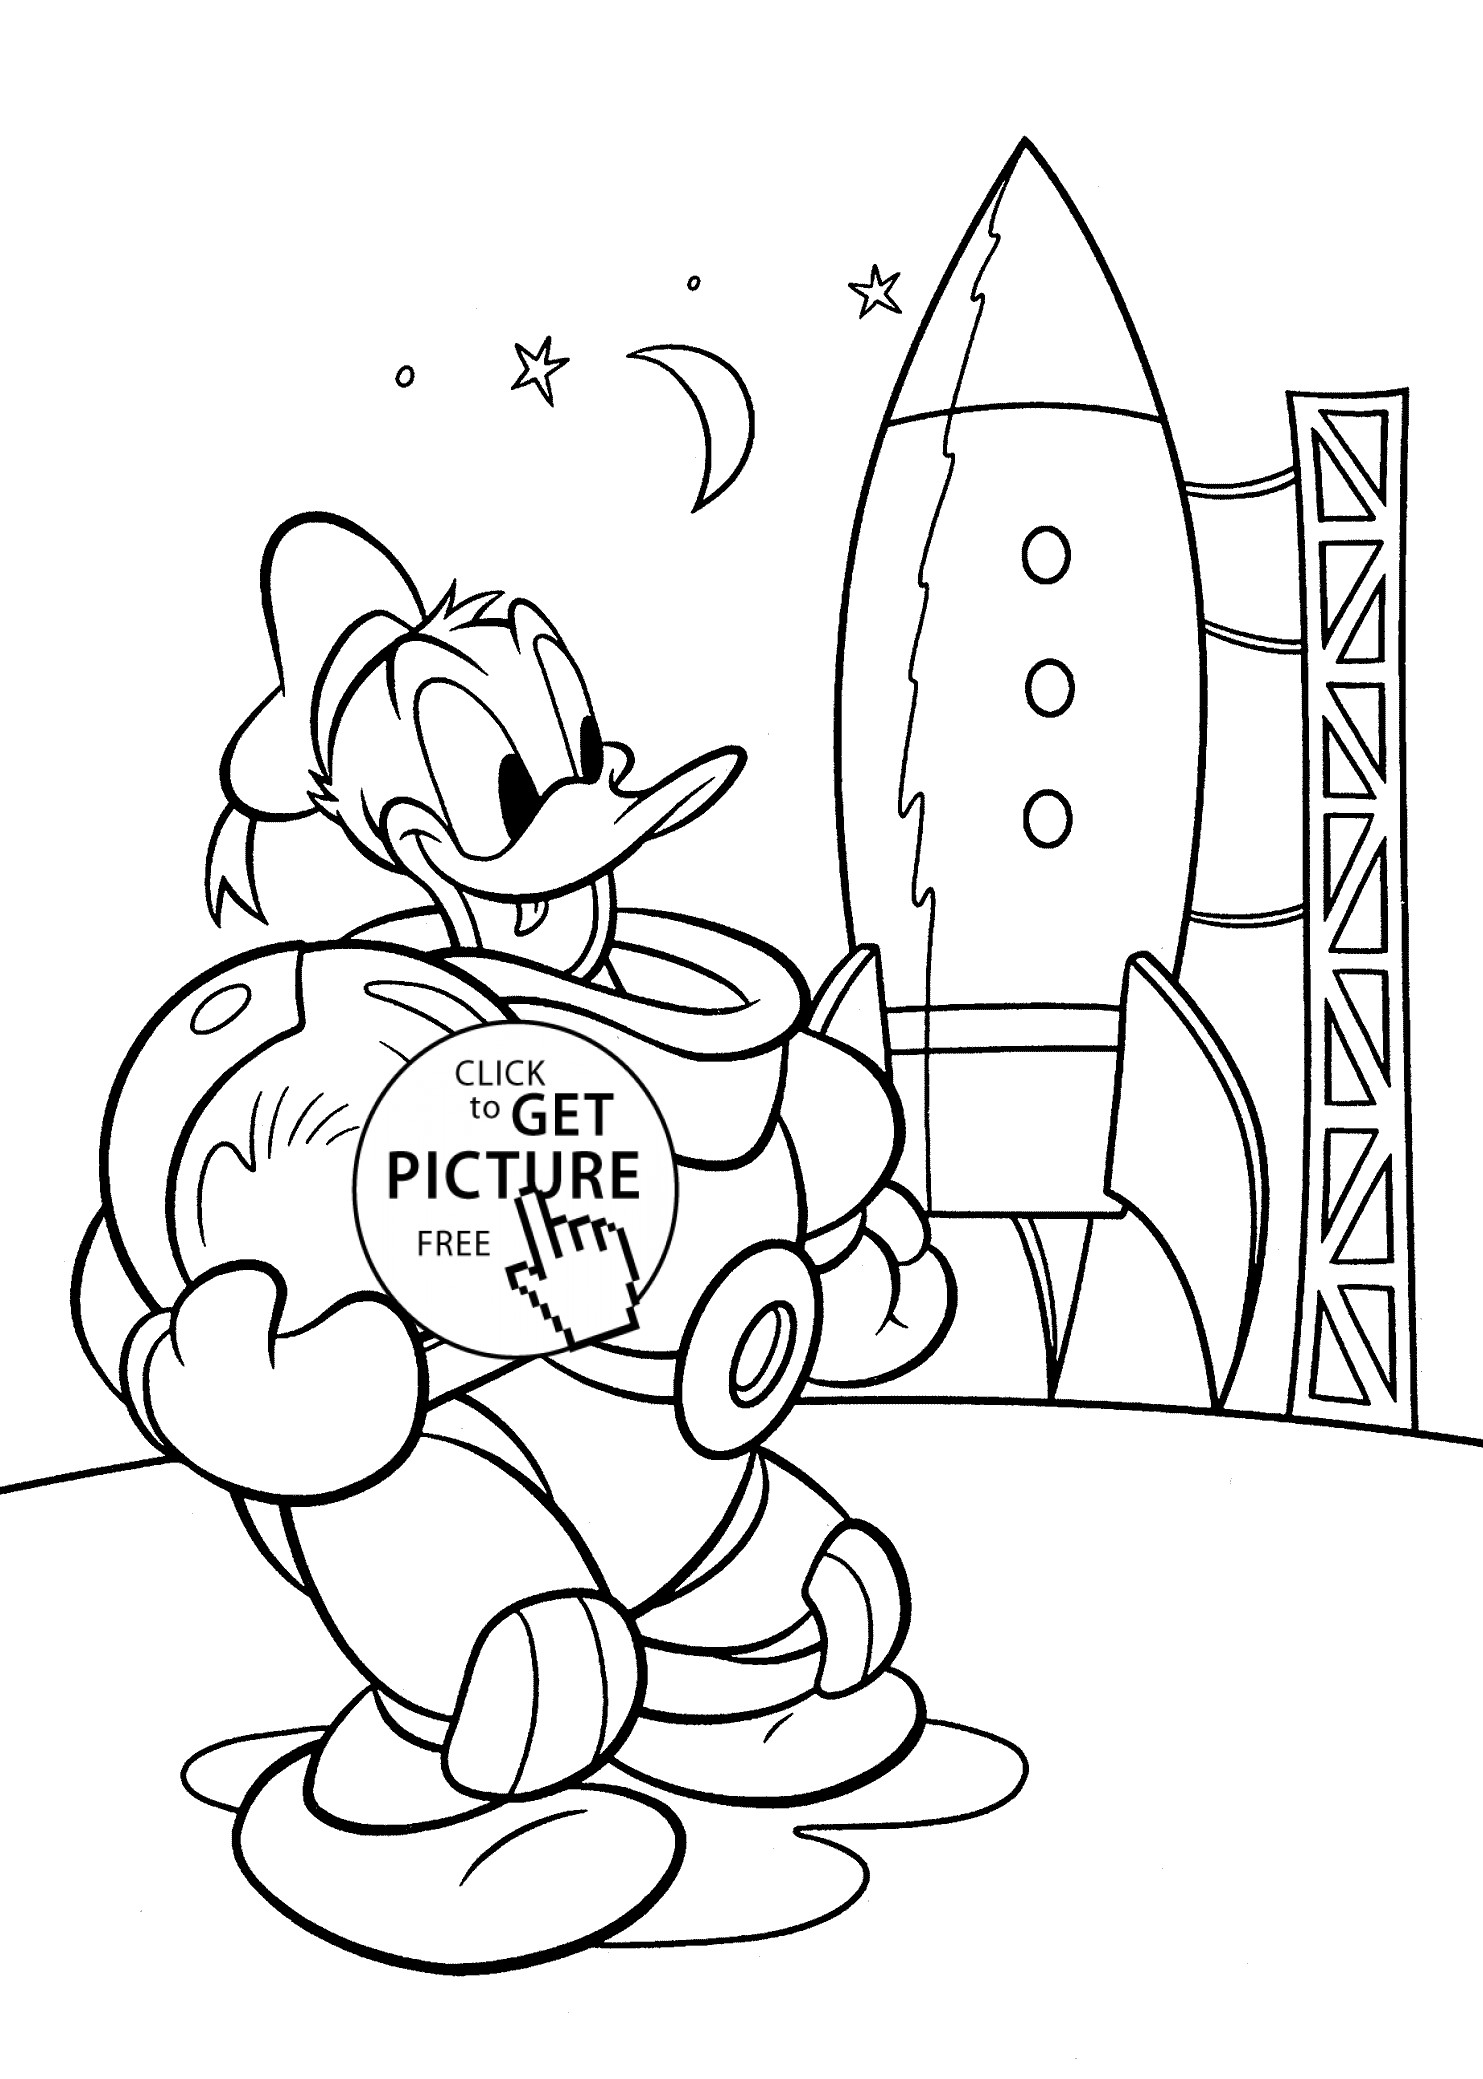 Coloring Sheets For Children
 Donald Duck astronaut coloring pages for kids printable